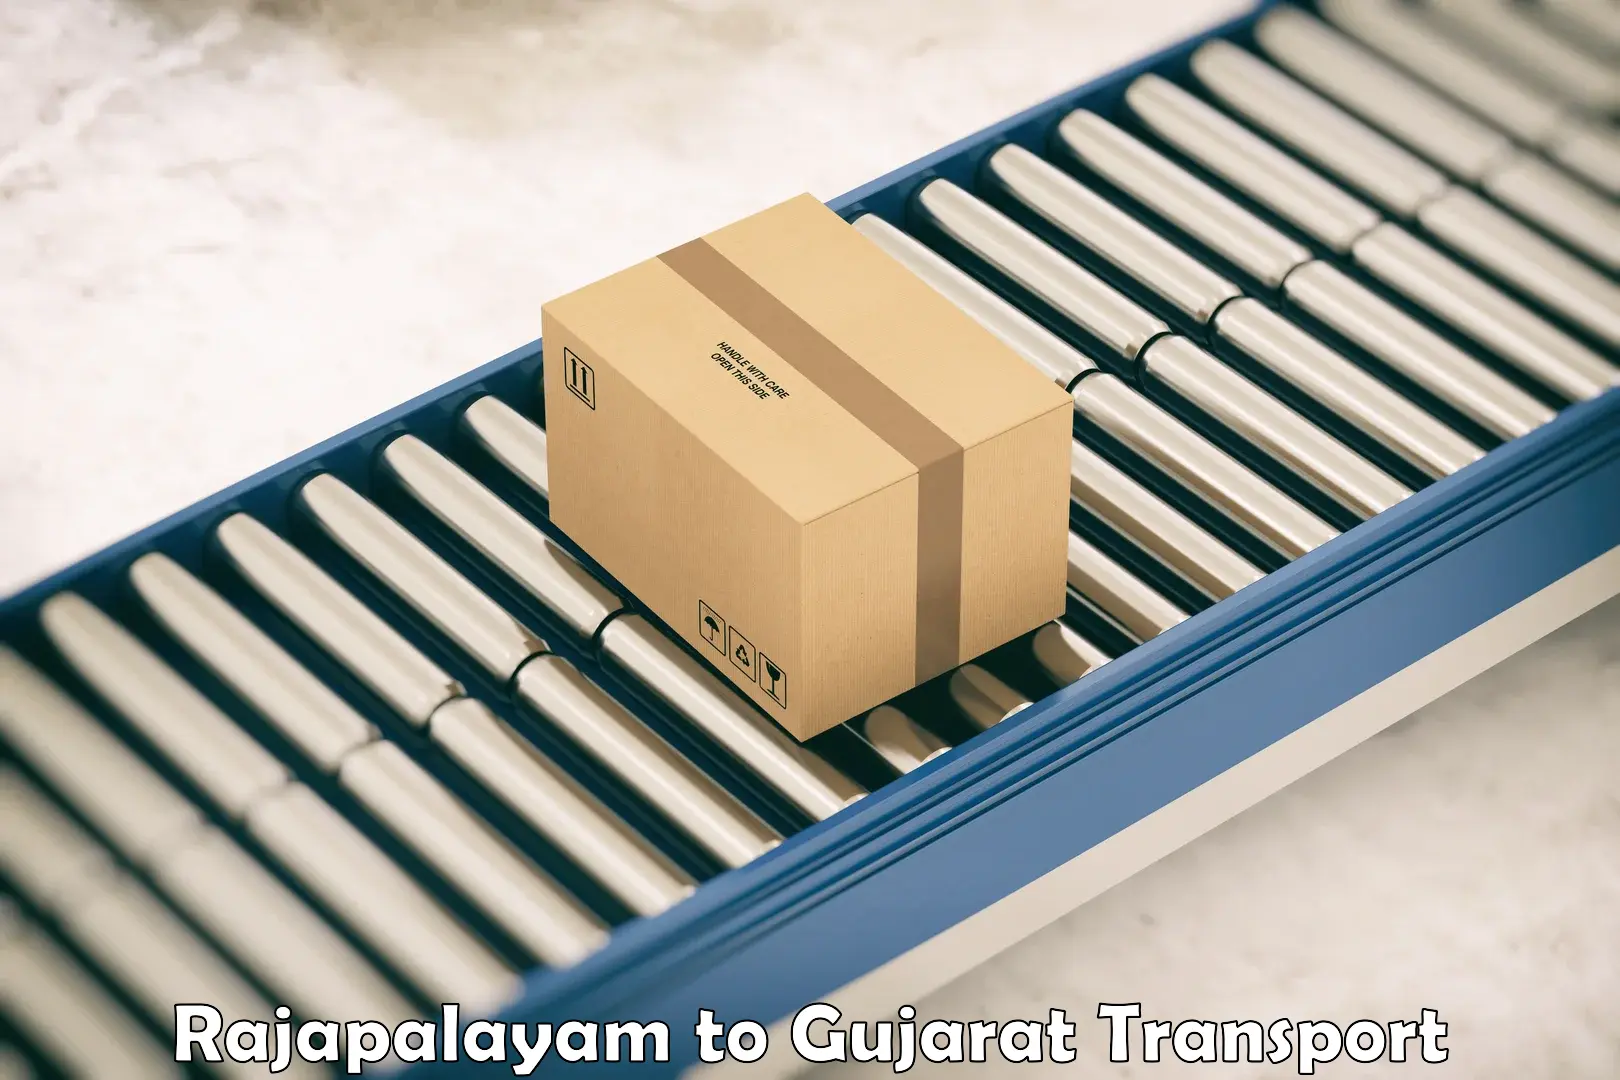 Goods delivery service Rajapalayam to GIDC